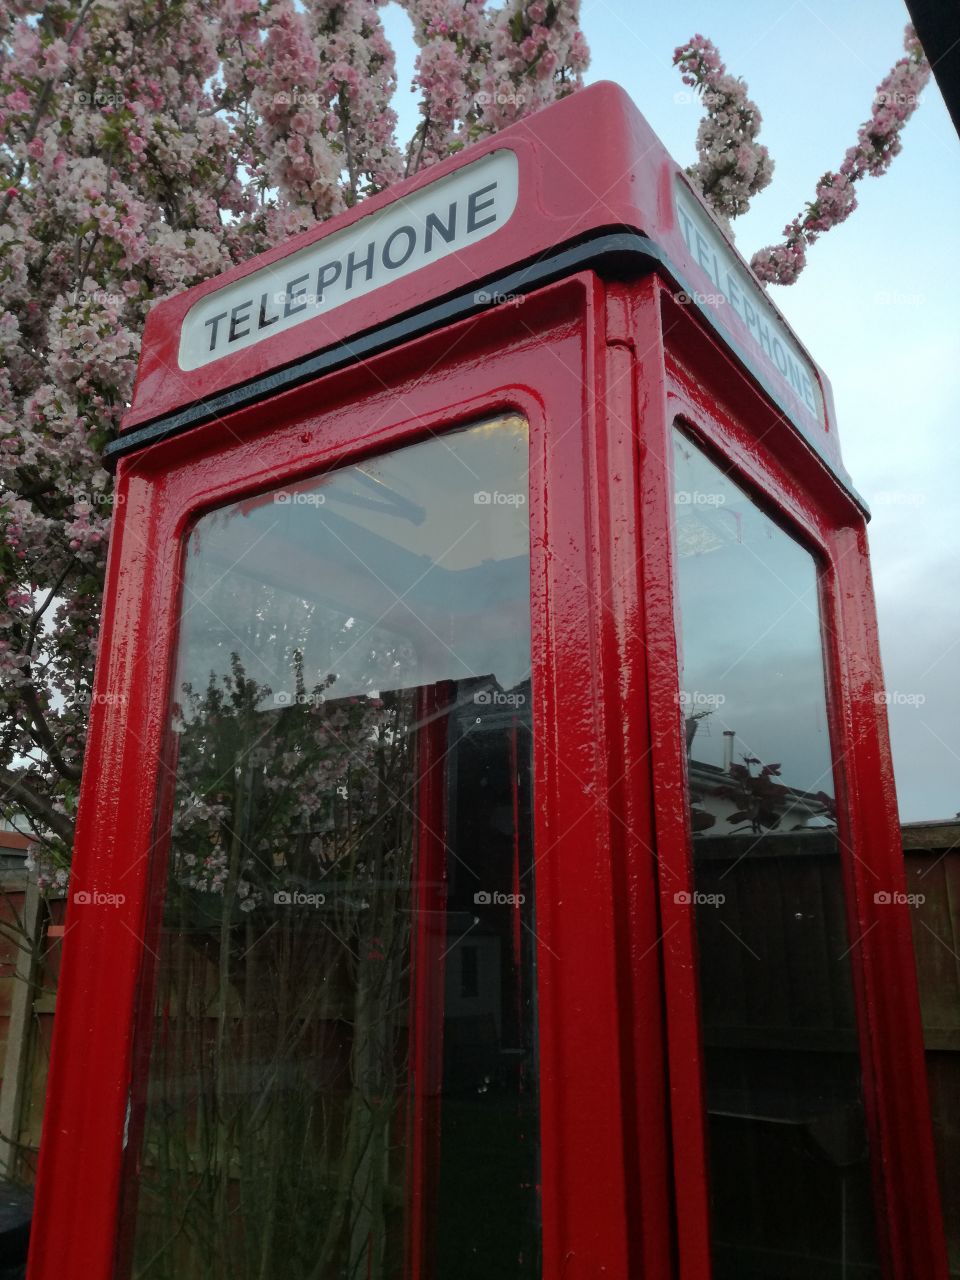 Renovated K8 Red Telephone Box from the 1980s.